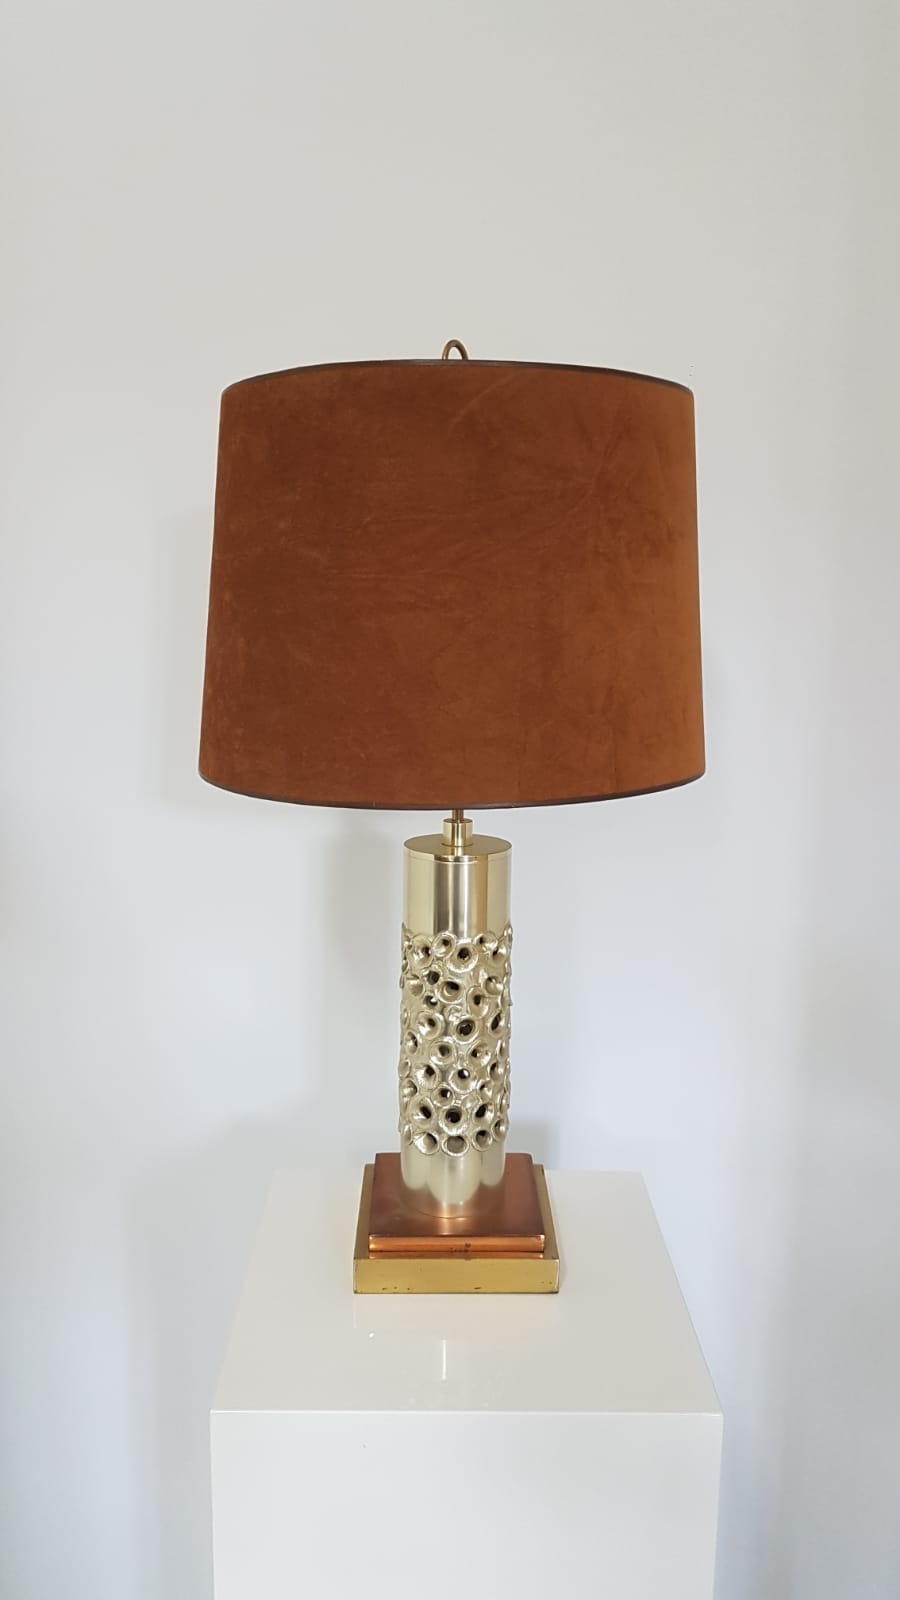 Unique brutalist table lamp - silver-plated aluminum - Willy Luyckx for Aluclair - 1960s